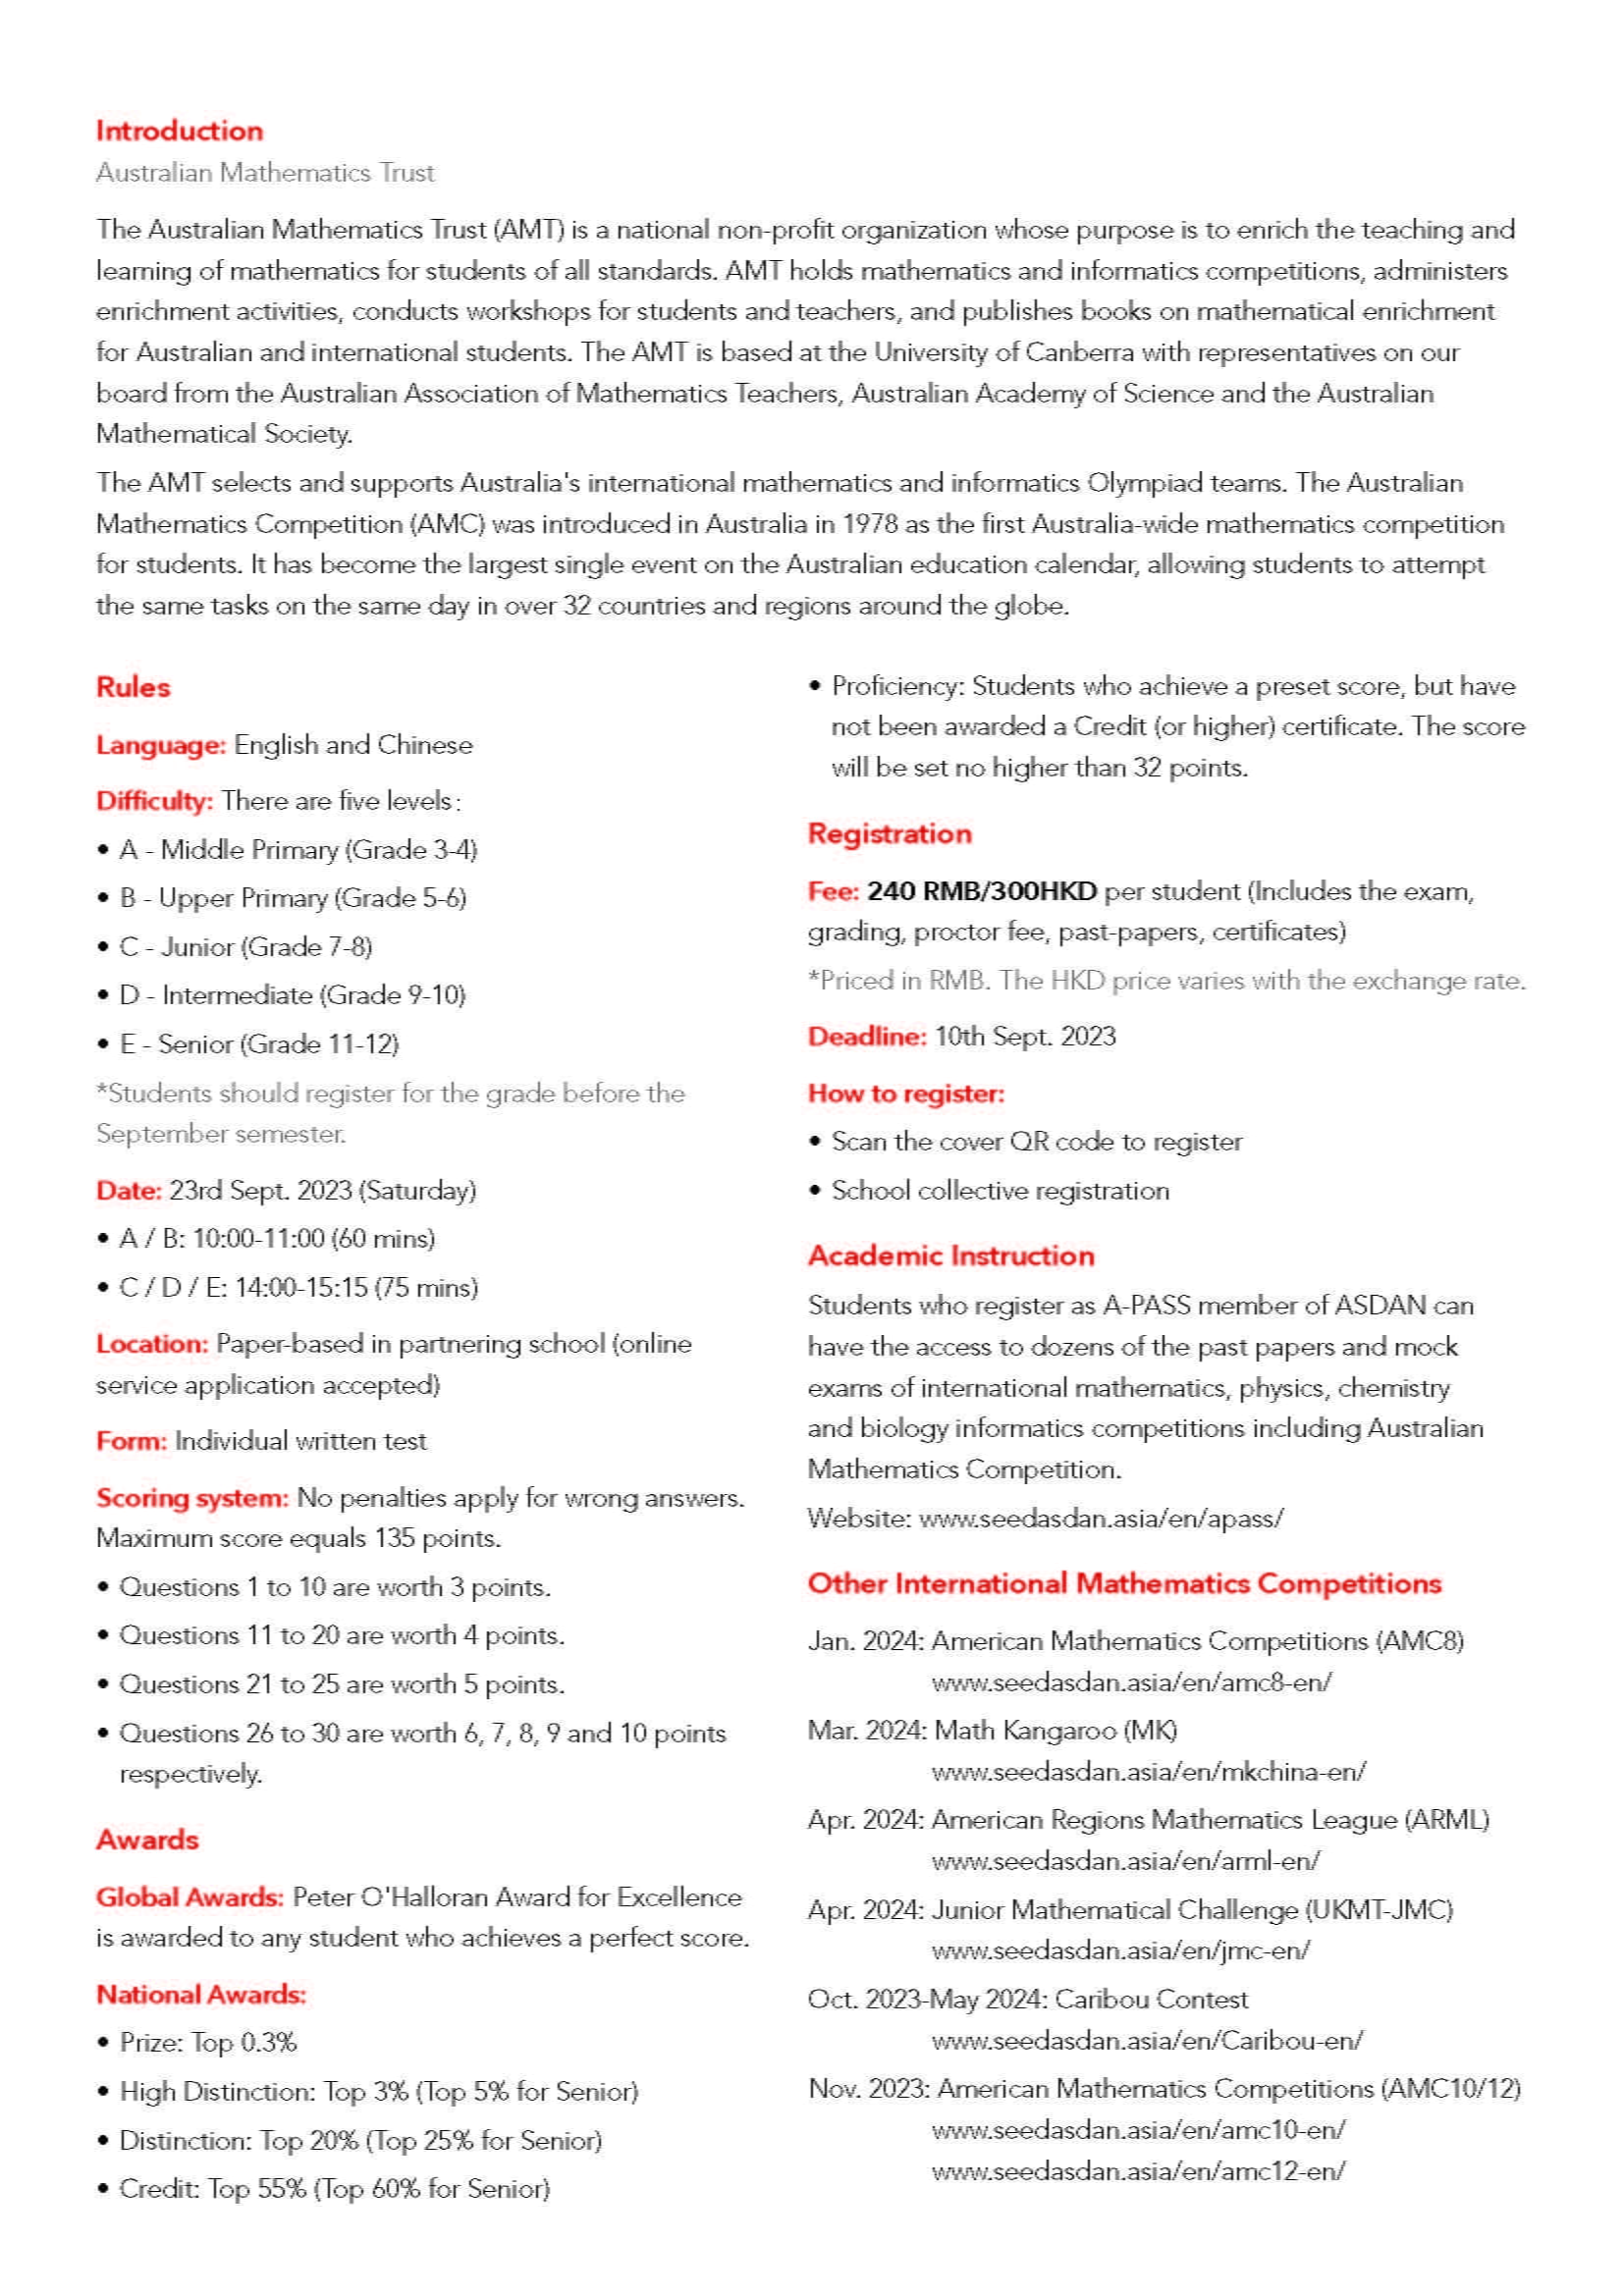 Sign up for Australian Mathematics Competition AMC Sep 2023 - Sign up for Australian Mathematics Competition AMC Sep 2023